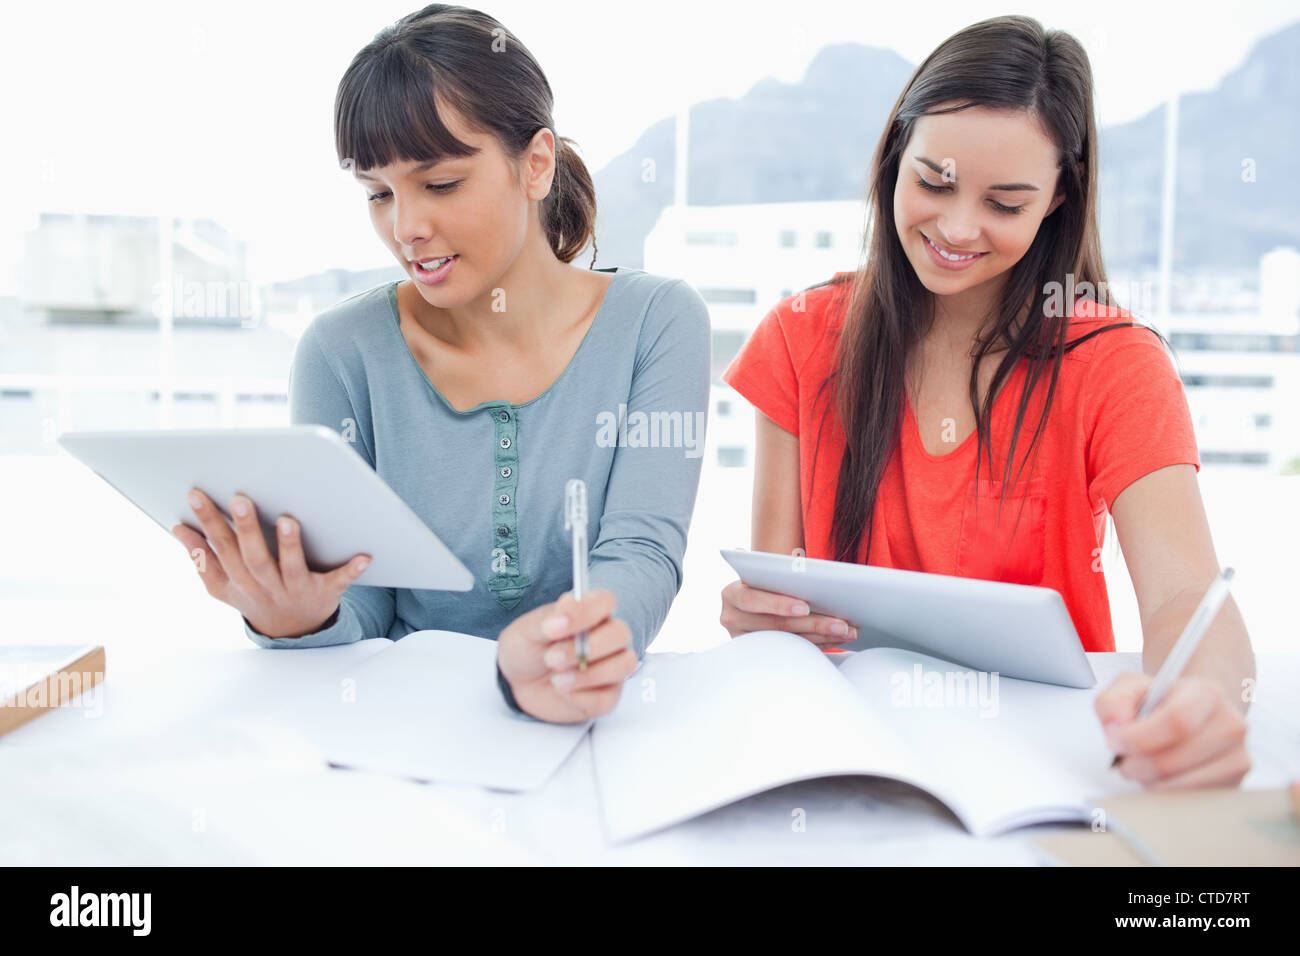 Two girls both using tablet pc's to do their homework Stock Photo